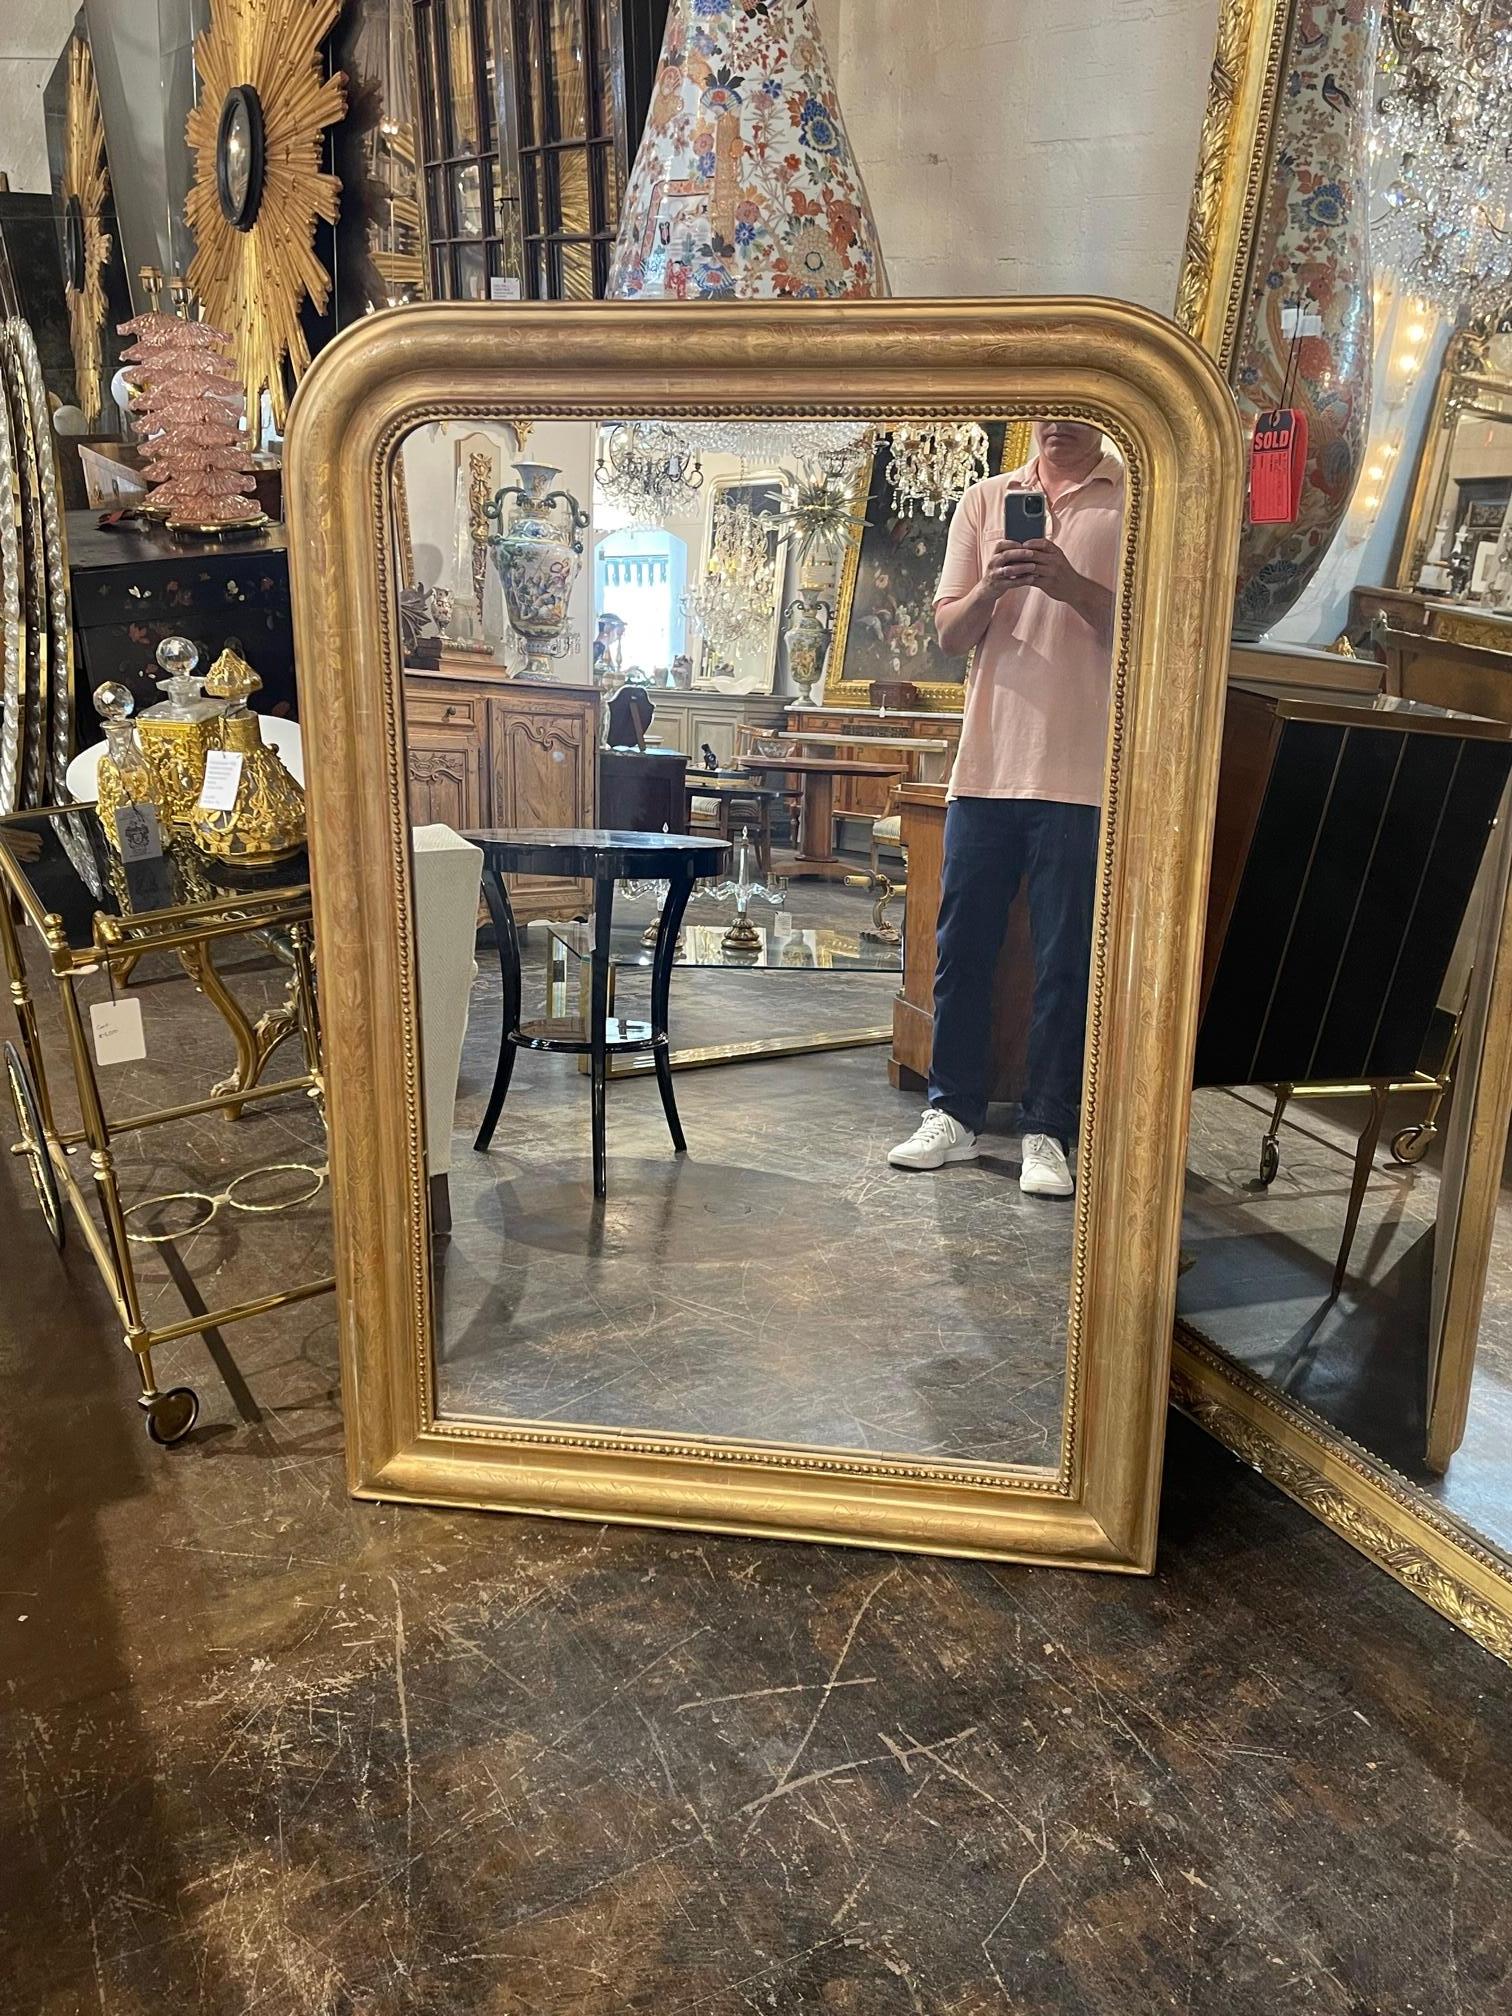 Very nice 19th century gold gilt French Louis Phillipe mirror. The piece has a beaded inner border and a lovely floral pattern. A beautiful classic look!